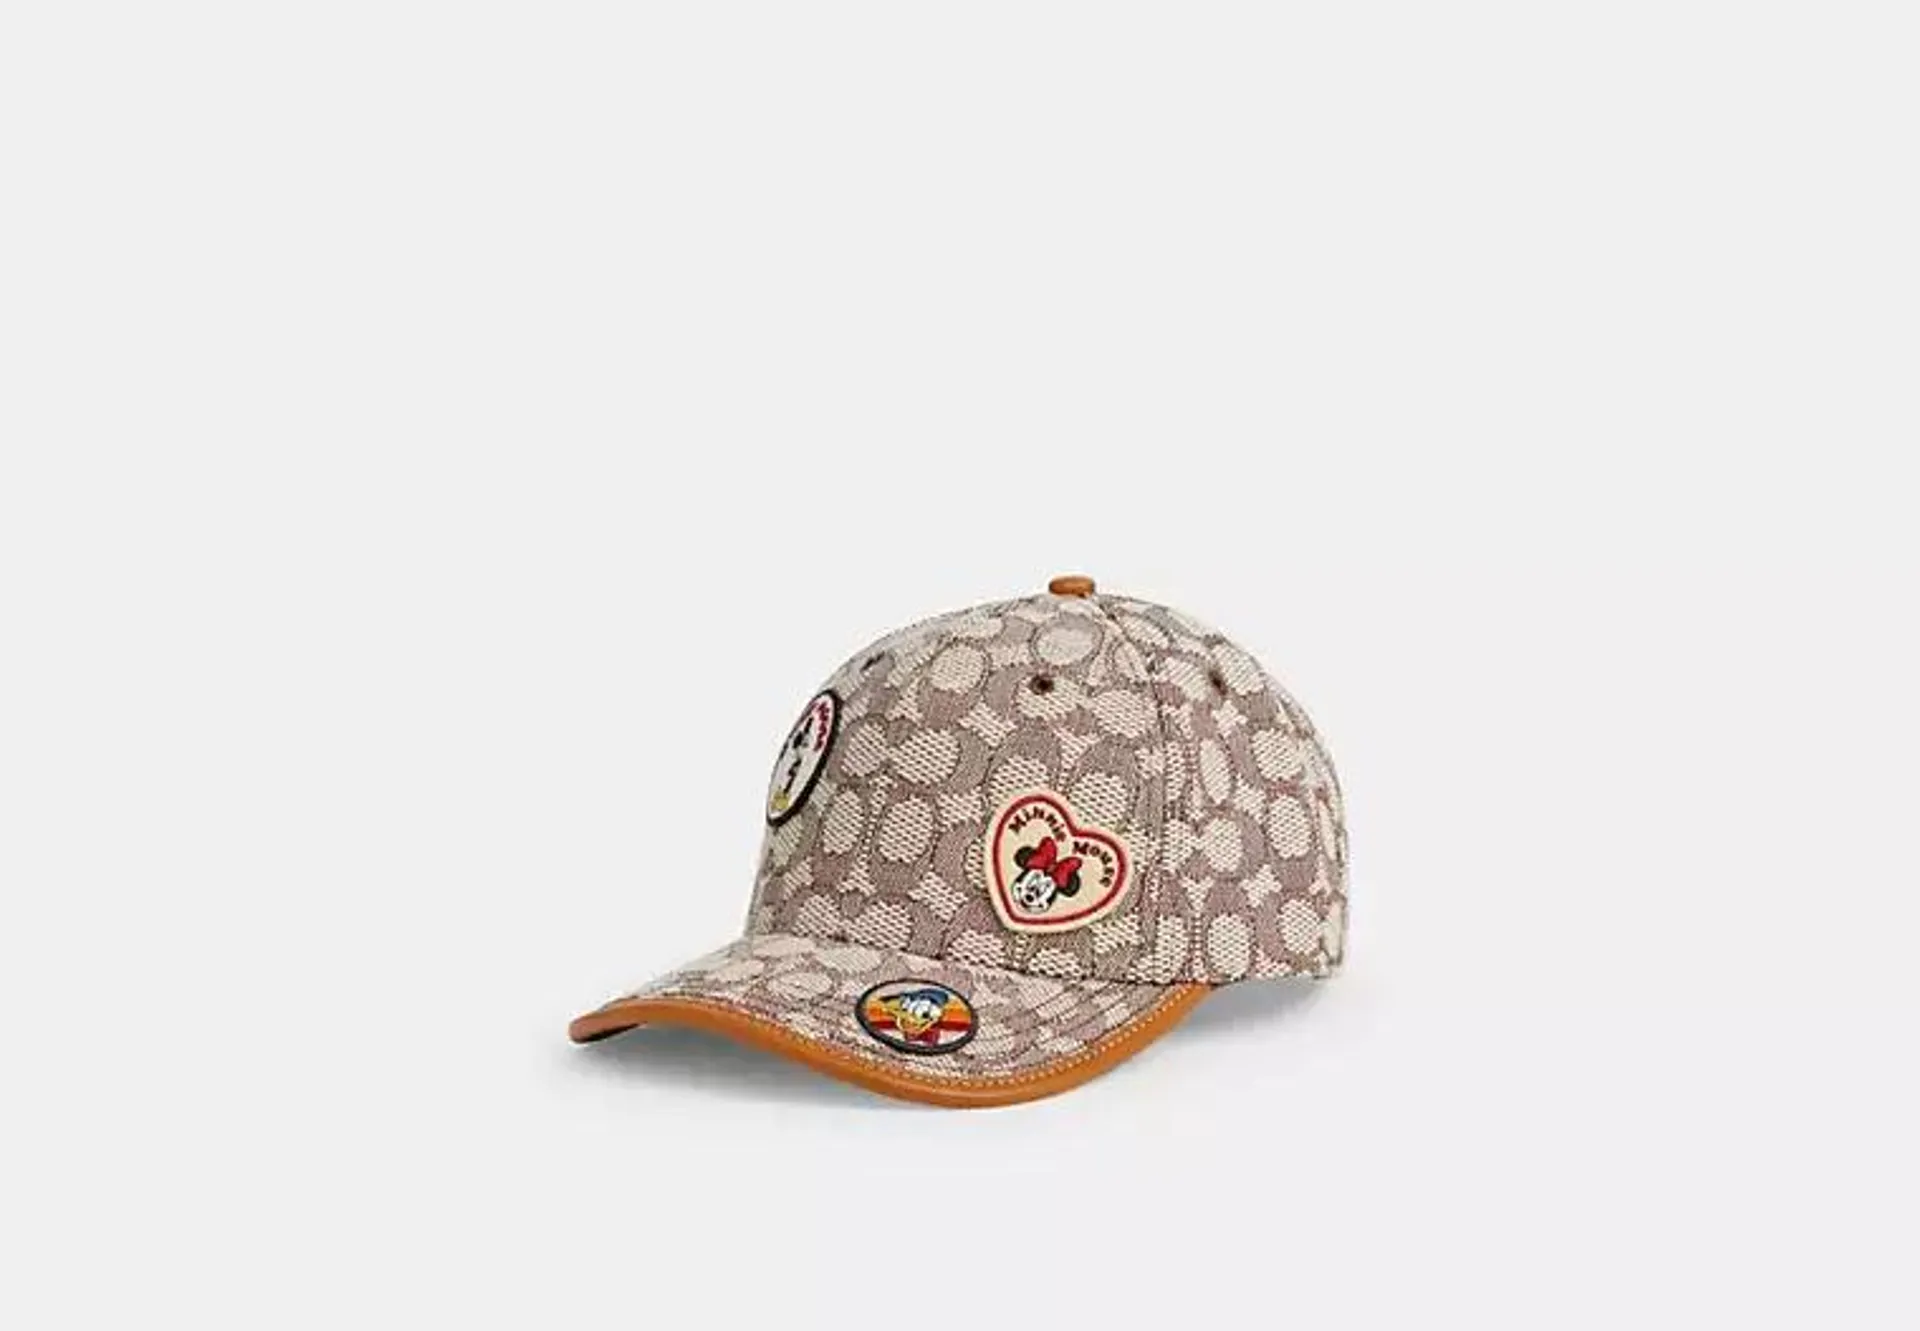 Disney X Coach Signature Baseball Hat With Patches